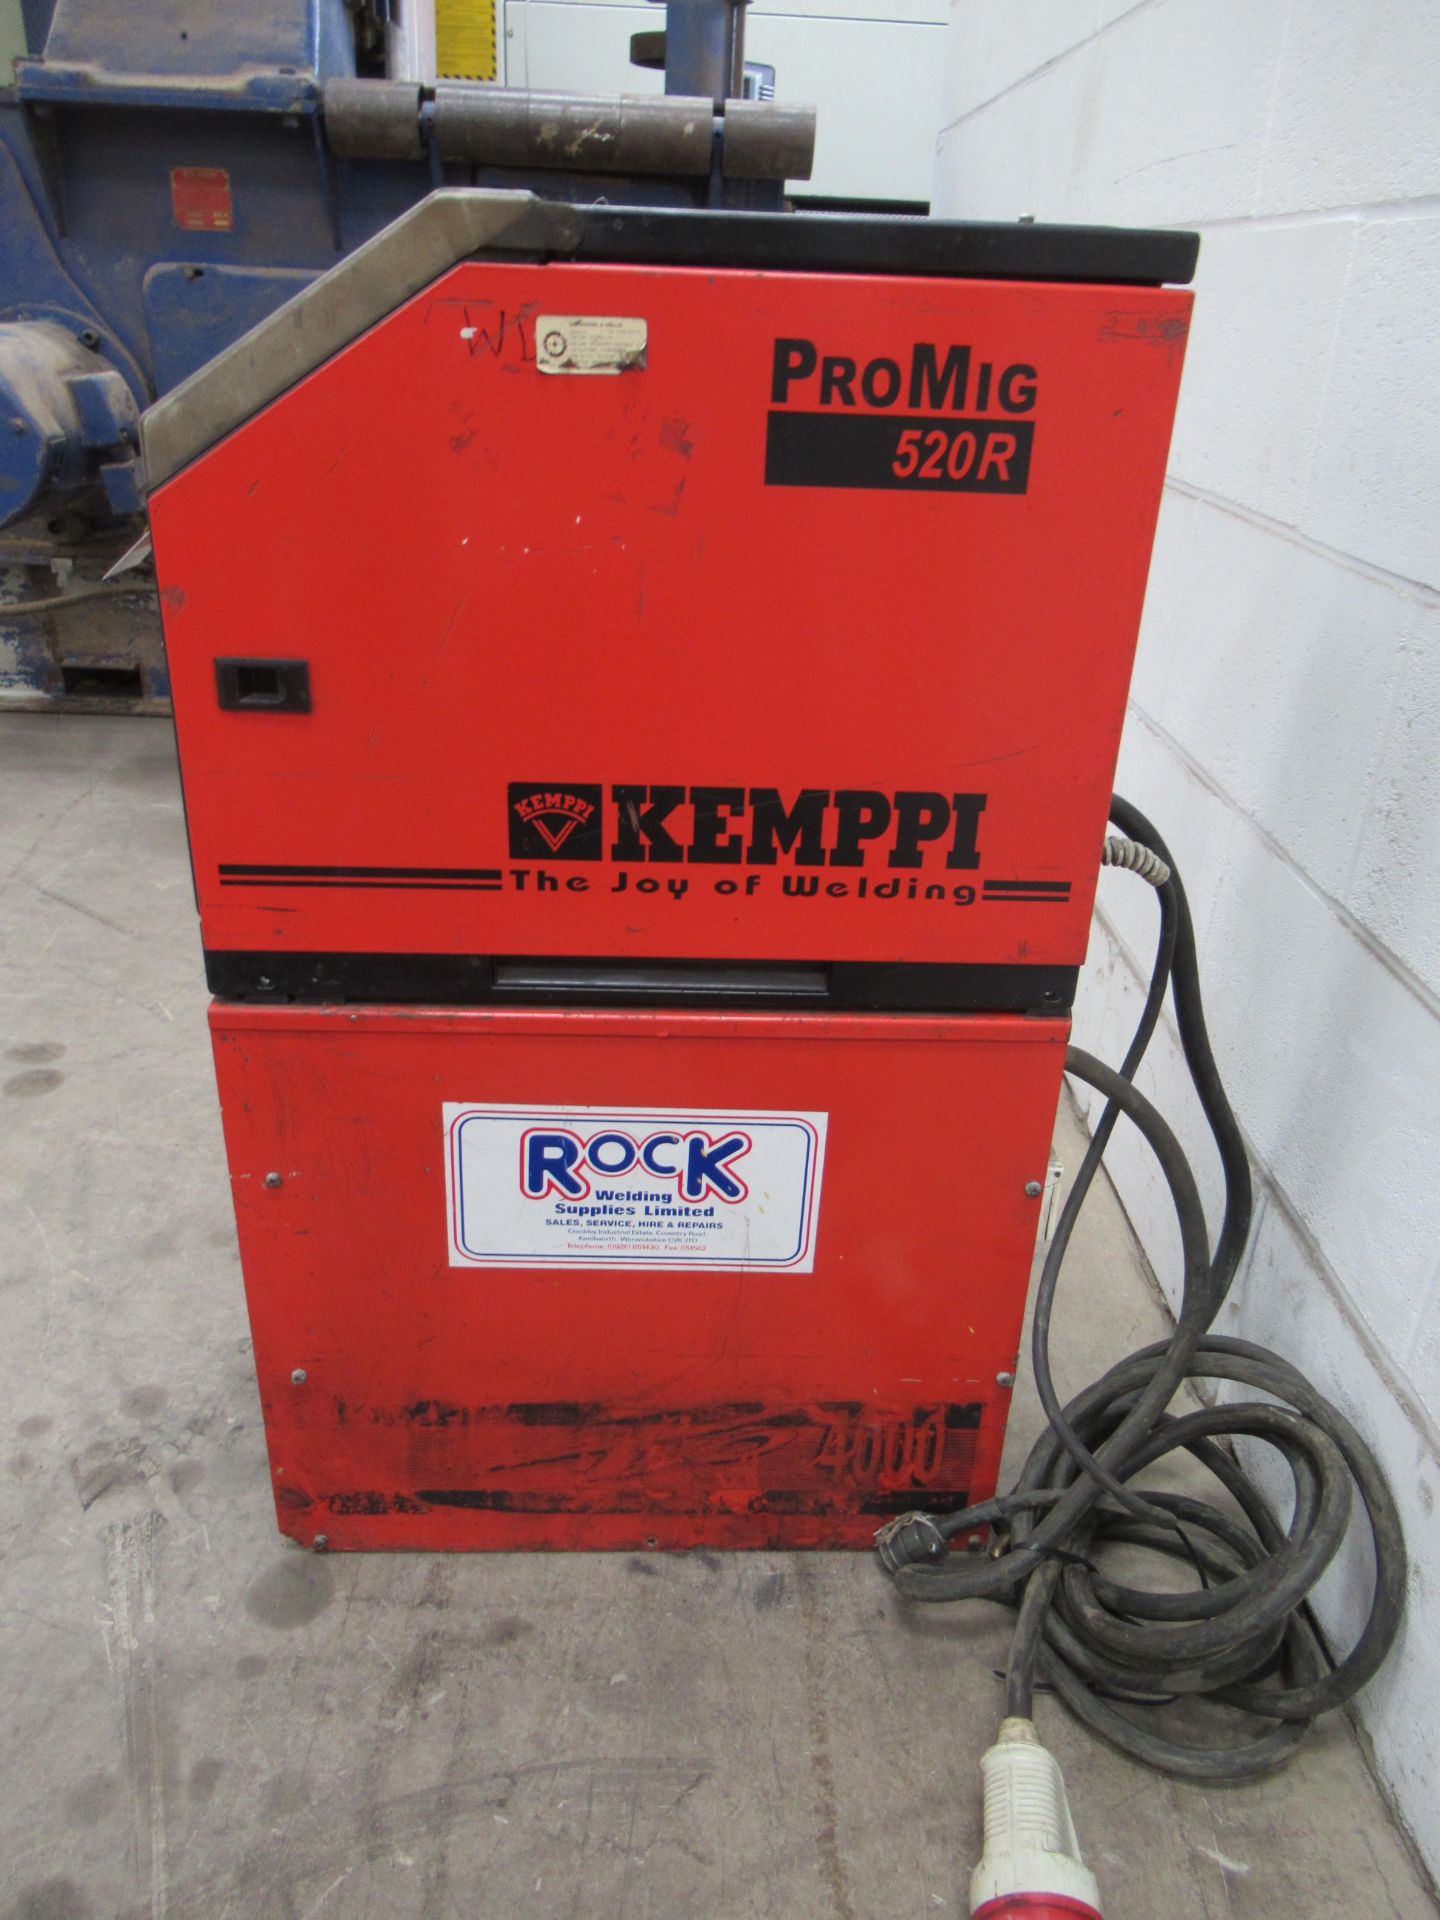 Kemppi Promig 520R & Kemppi Pro 4000 Power source c/w torch and leads - Image 5 of 9